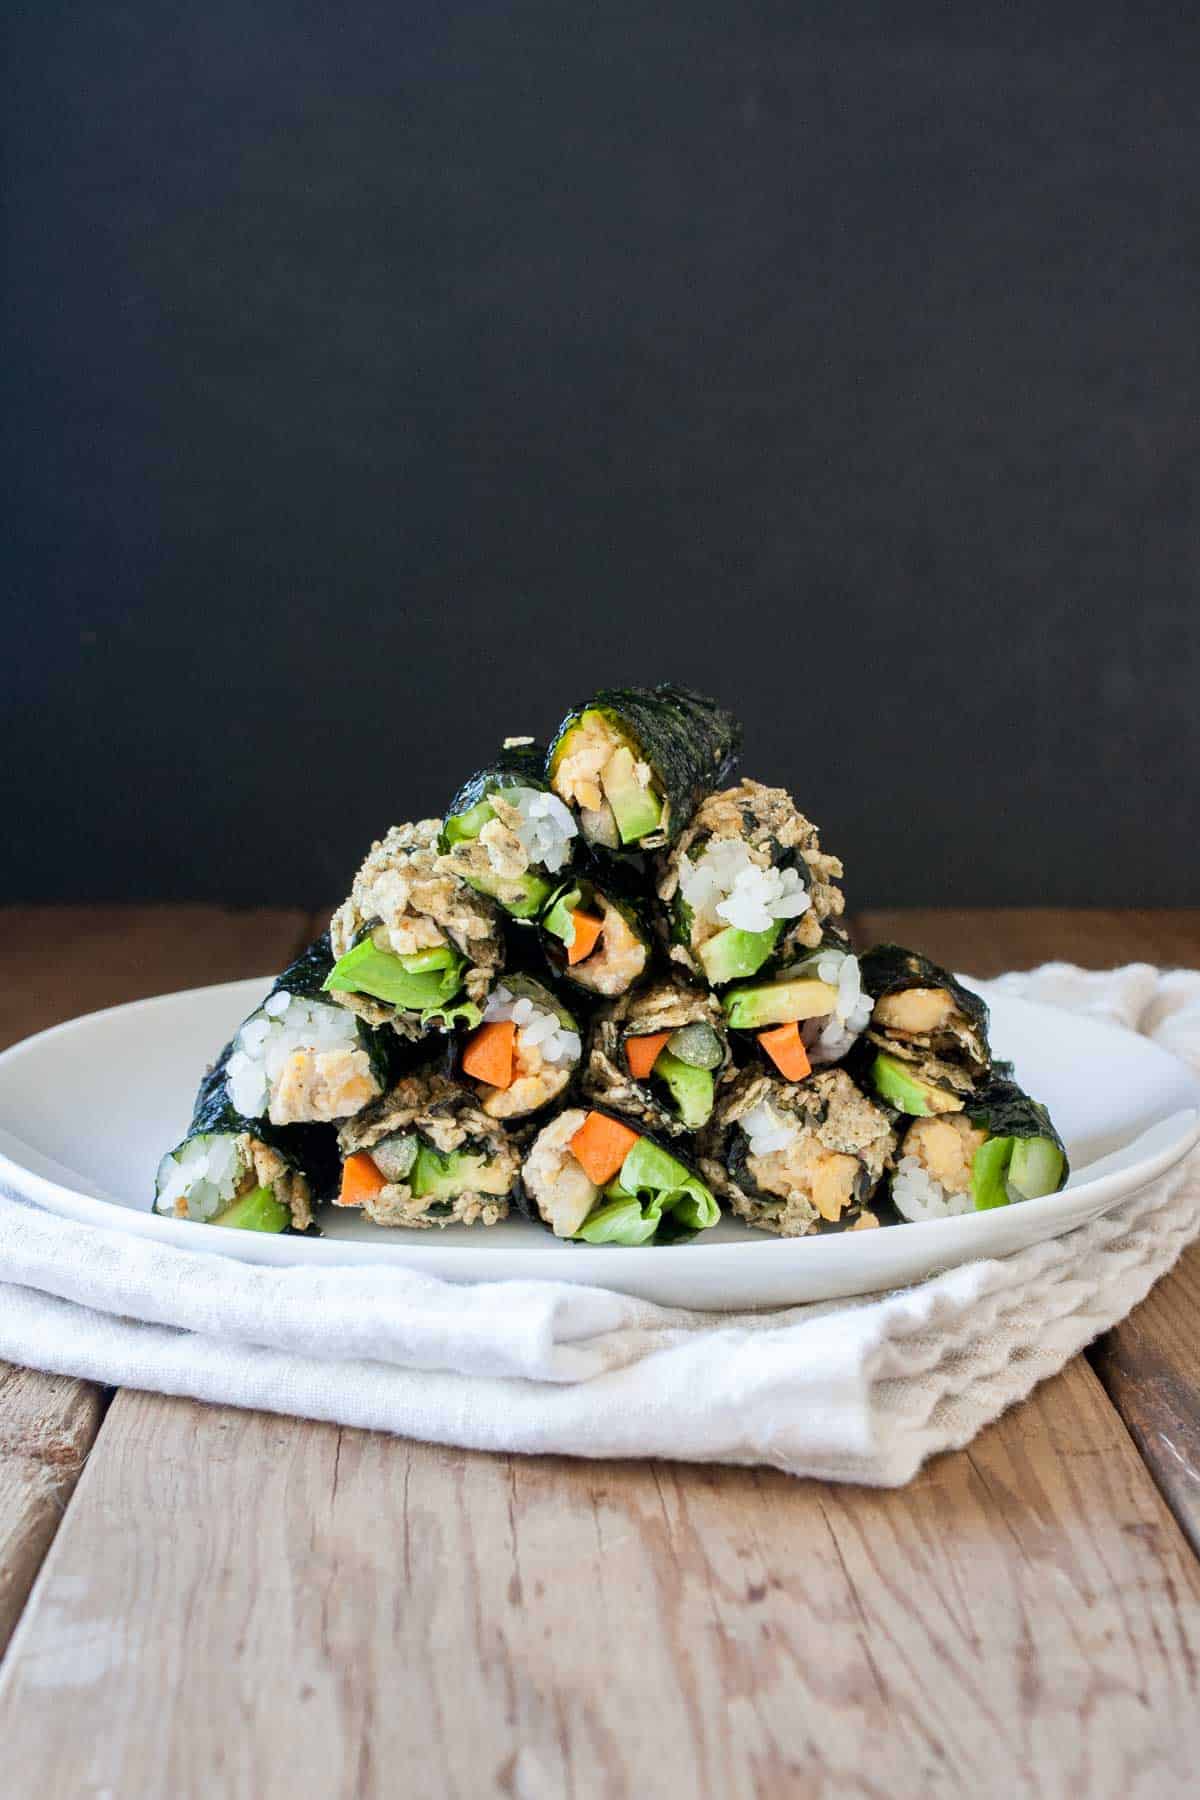 Snack sized sushi rolls stacked on a white plate in a pyramid pile on a wooden table.